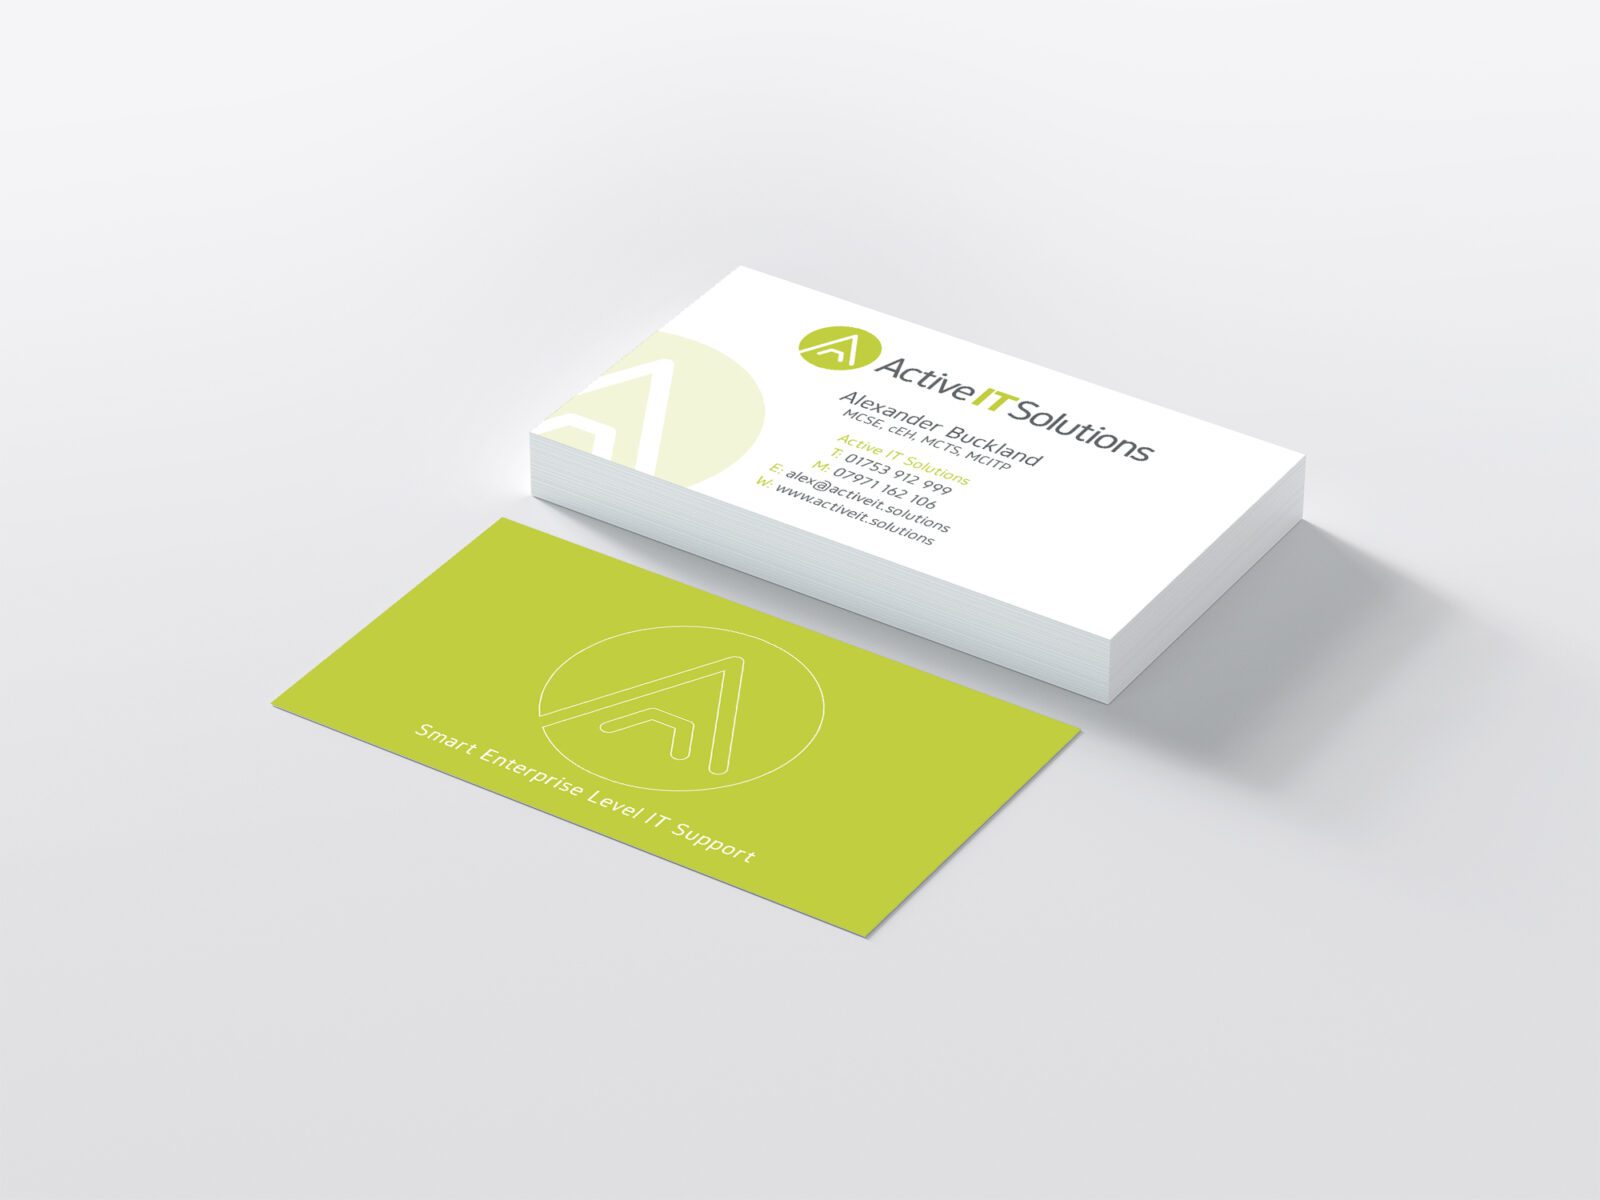 Mock-up of Active IT Solution's brand and business card design.